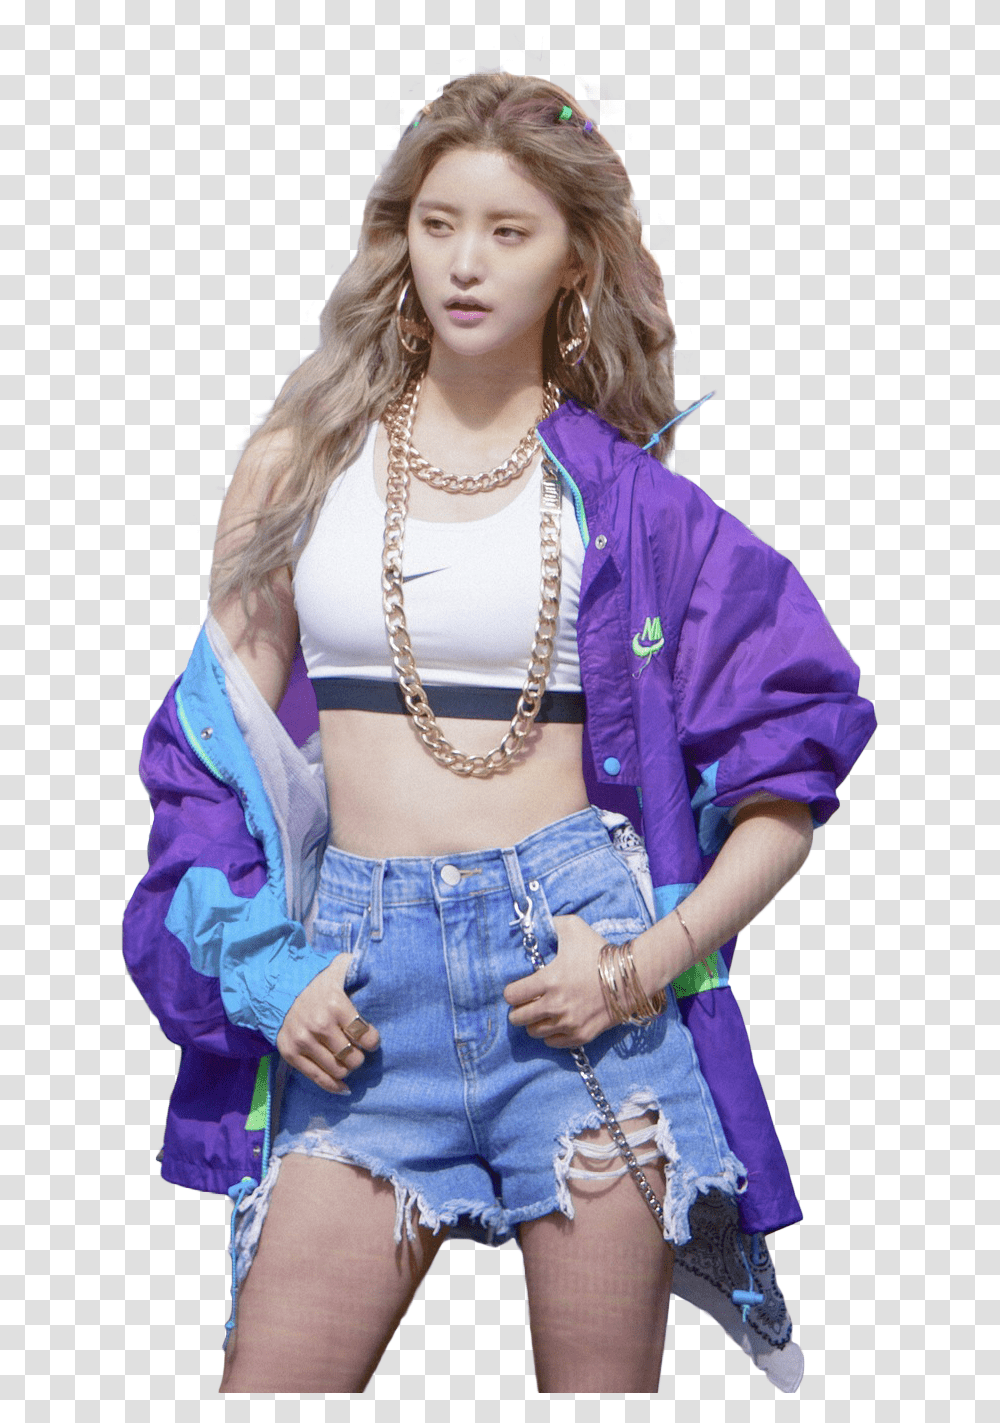 Jeonghwa Exid Kpop Korean Freetoedit White Crop Top And Jacket, Necklace, Accessories, Person Transparent Png